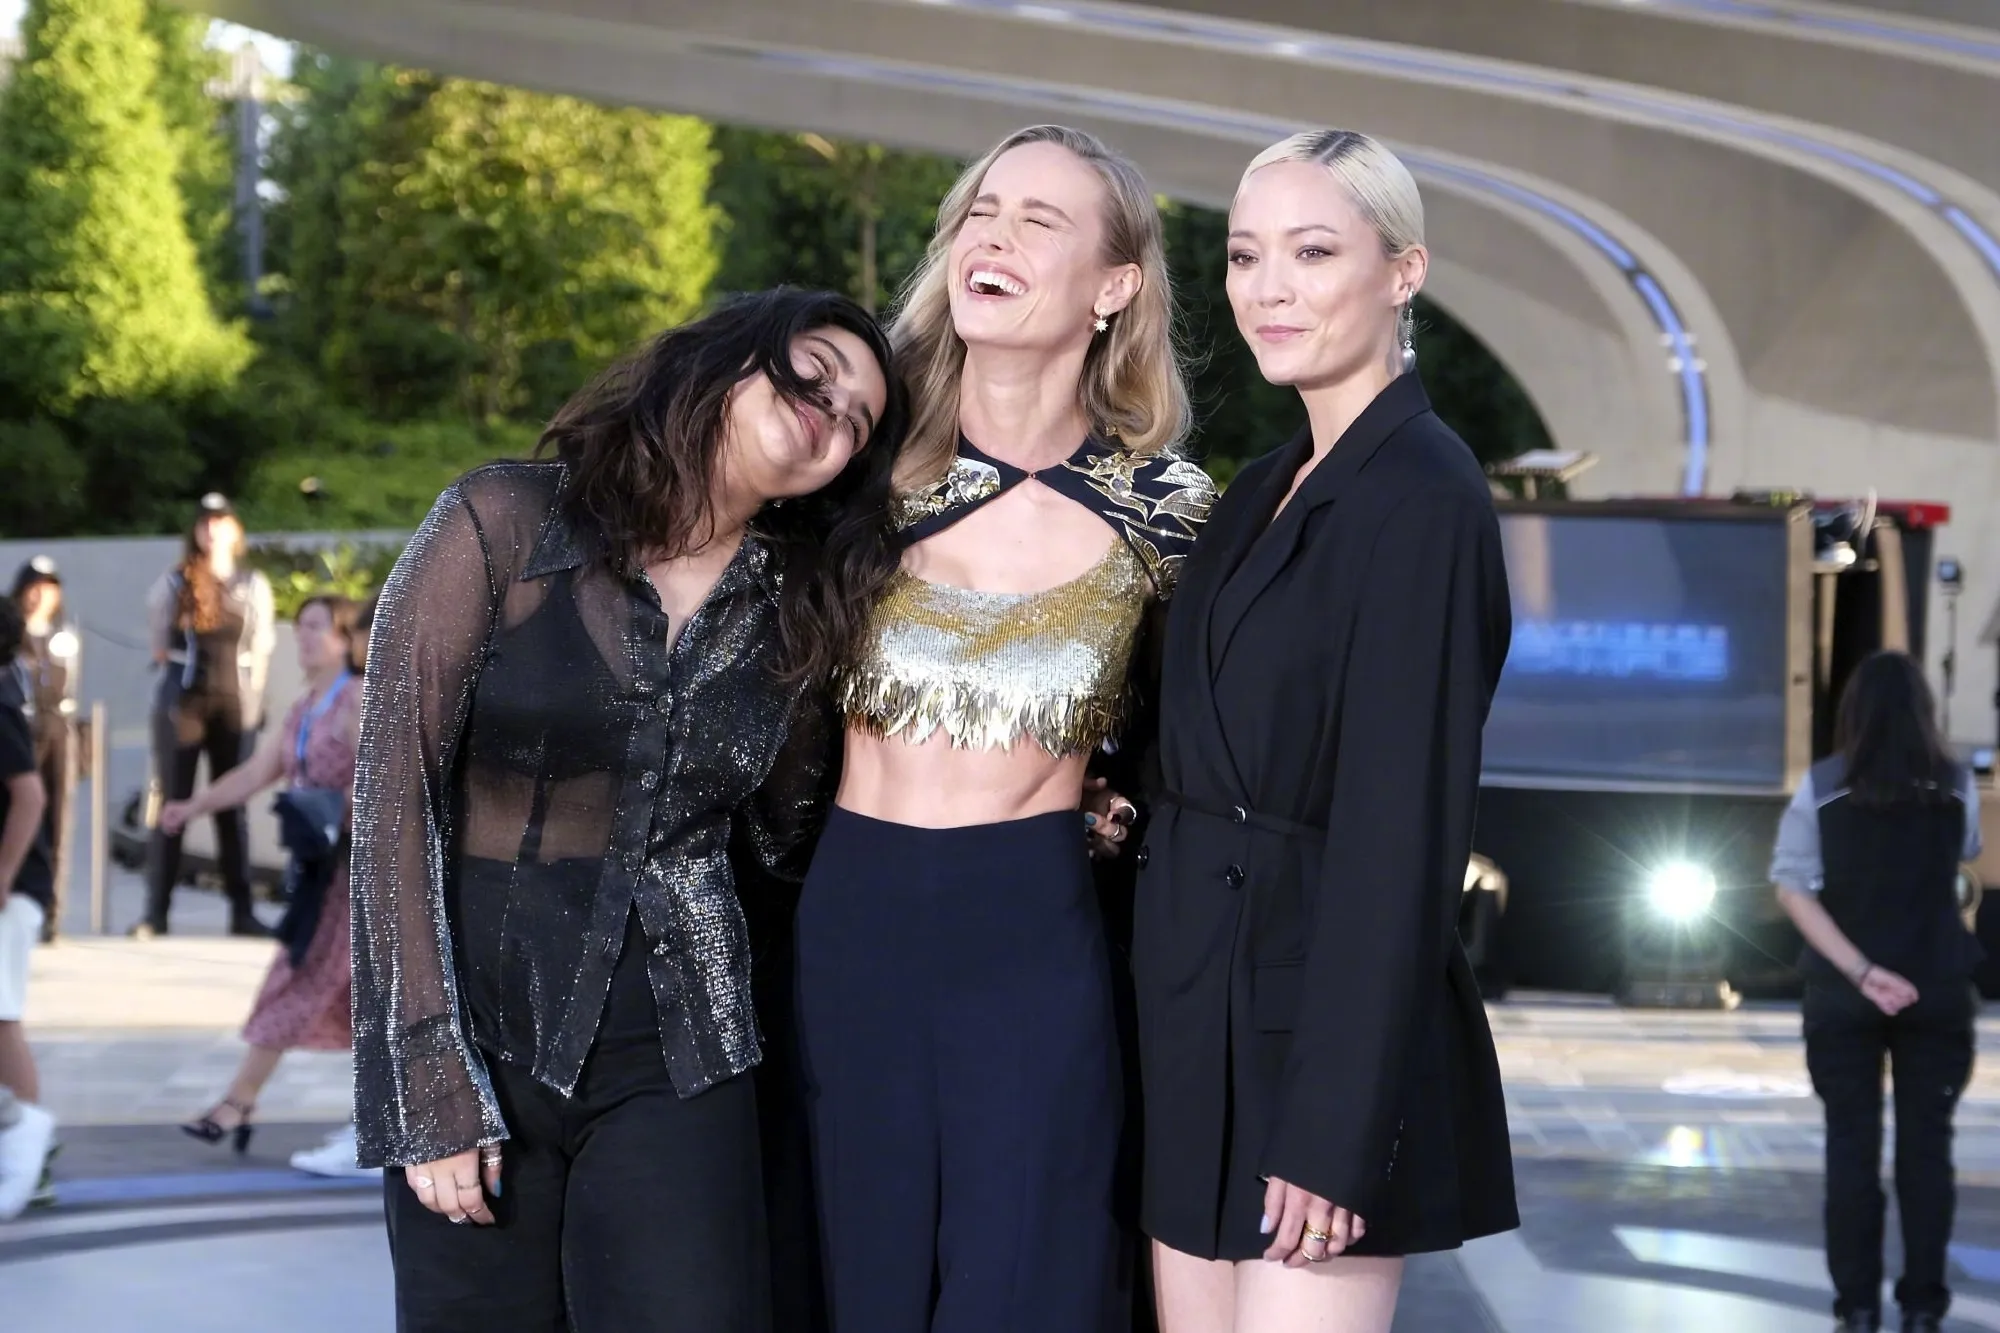 Brie Larson, Iman Vellani and Pom Klementieff attend the opening of "The Avengers" park at Disneyland Paris | FMV6